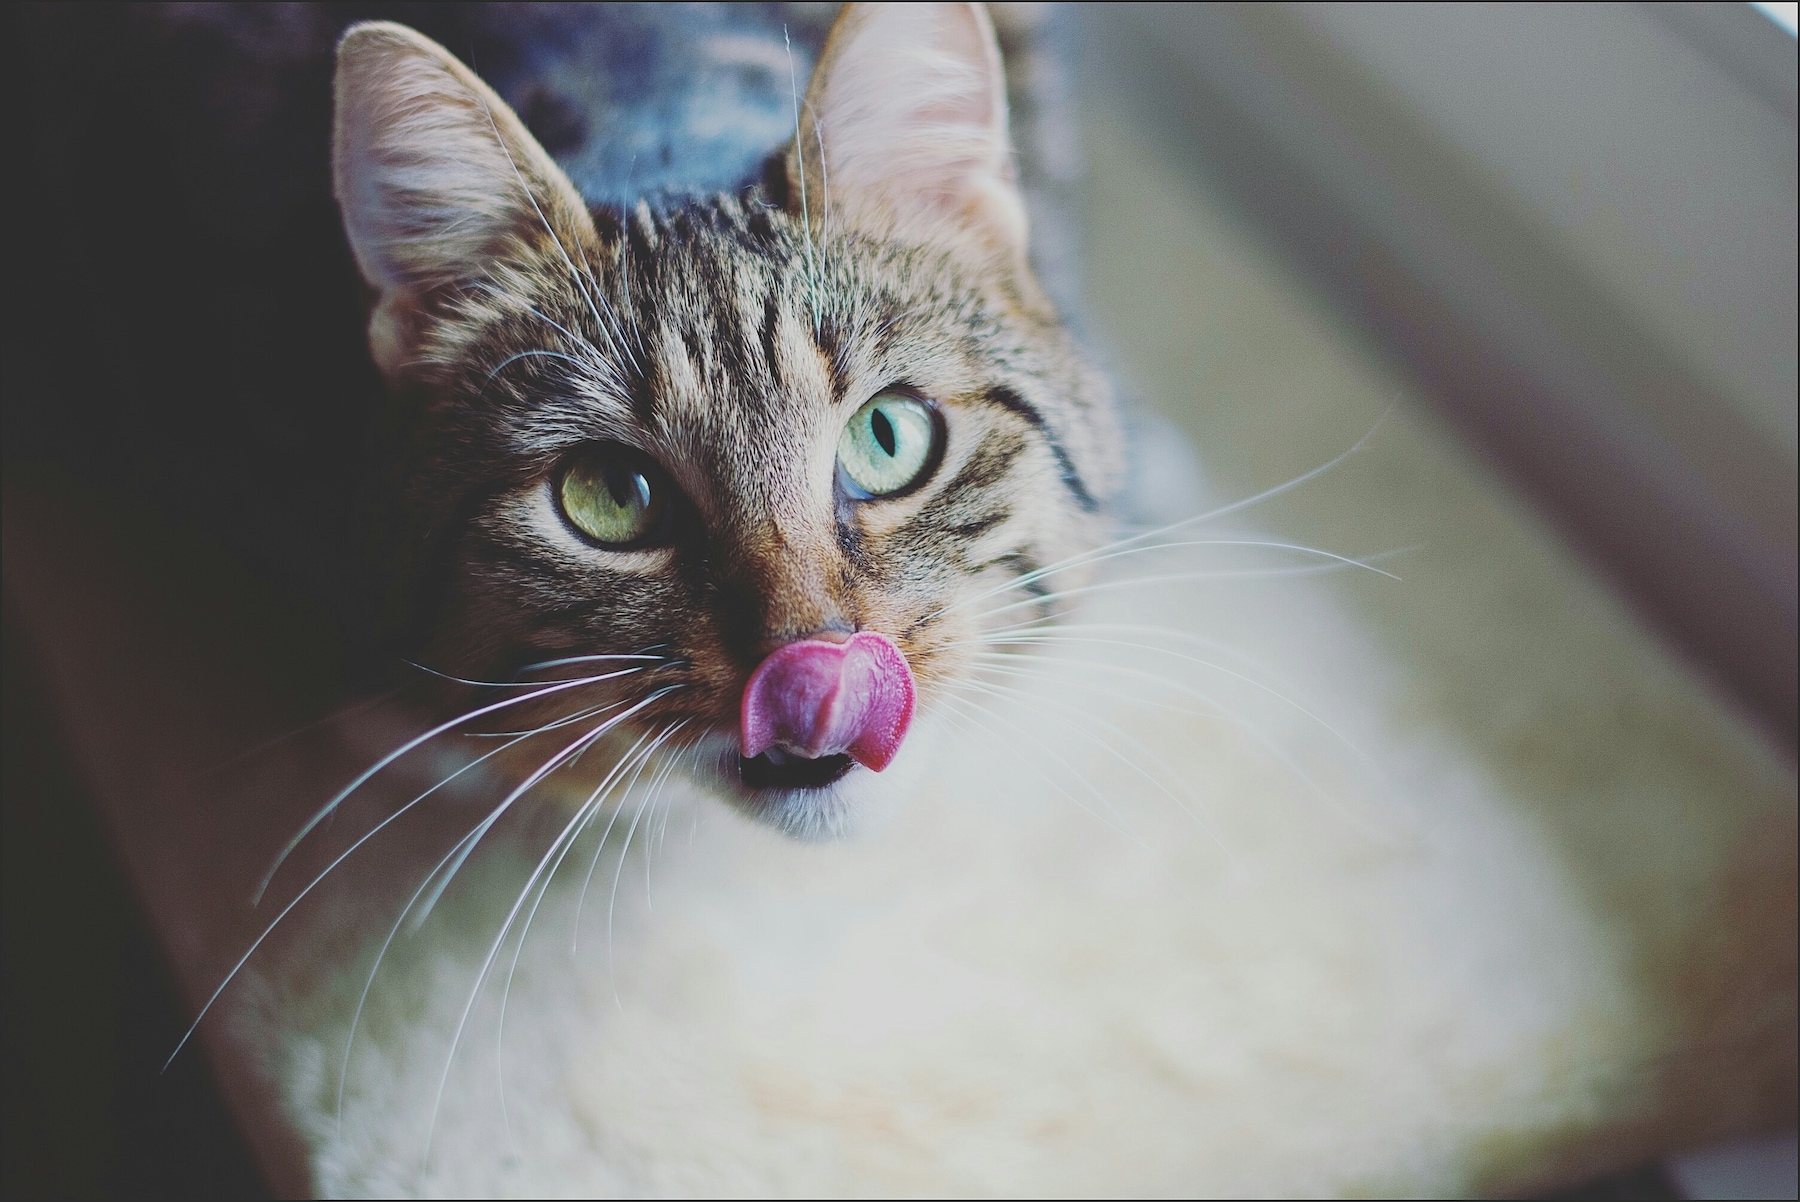 Cat drooling: Is it normal?